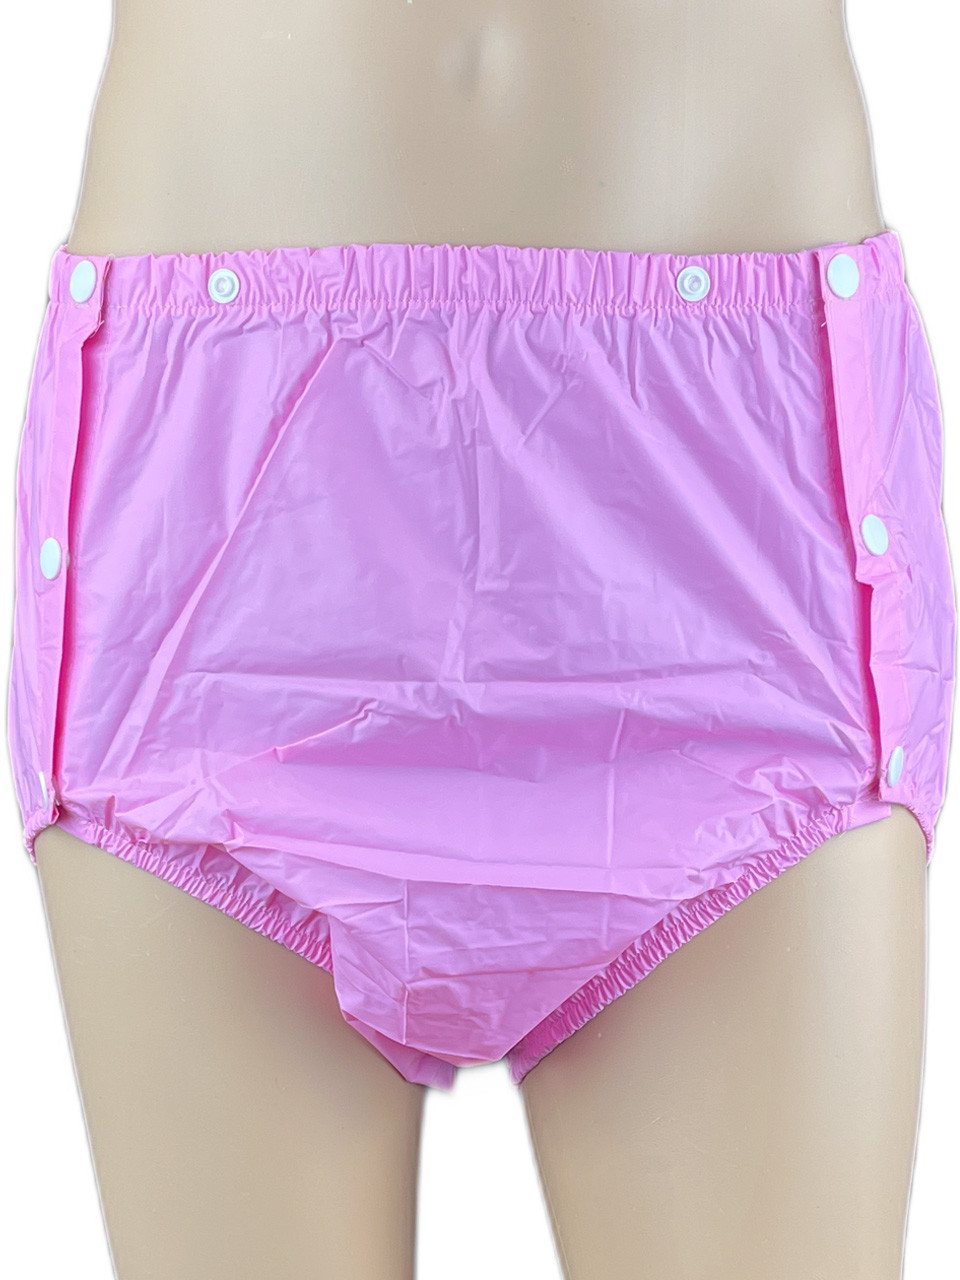 Cuddlz Pink side fastening snap on tpu stretchy plastic incontinence pants  for adults ABDL diaper lovers and adult size baby knickers briefs